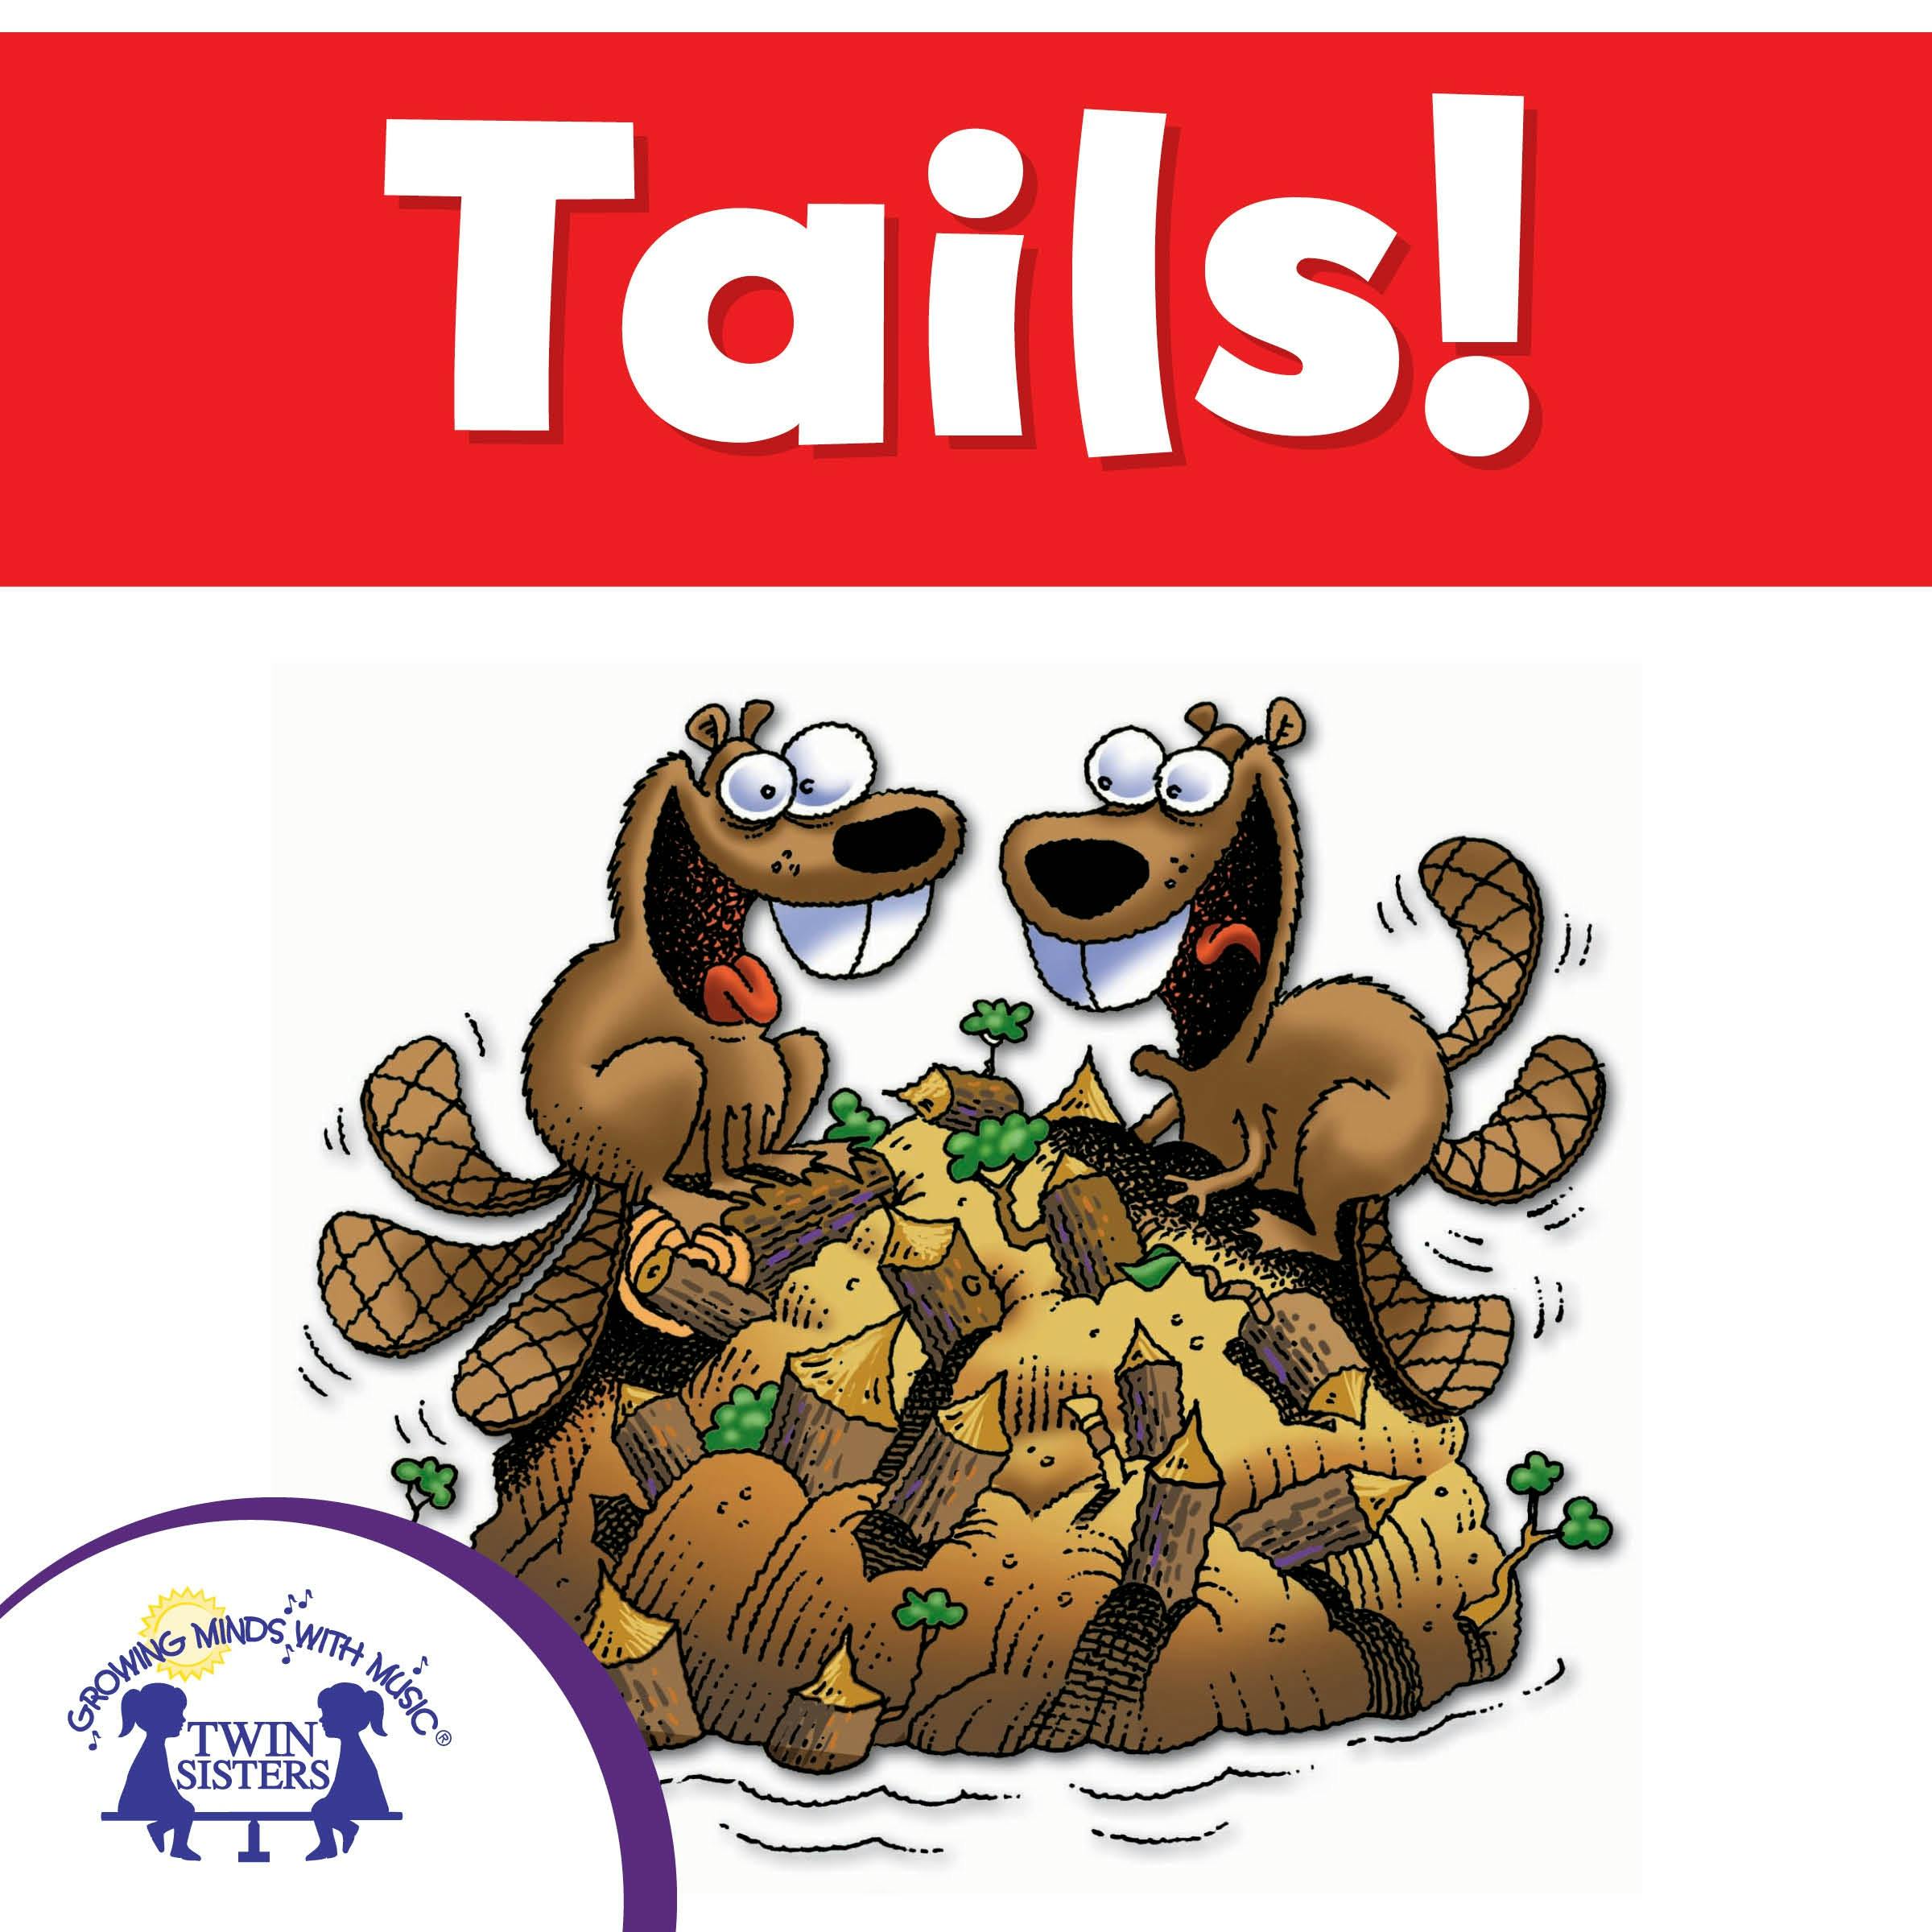 Tails! - undefined